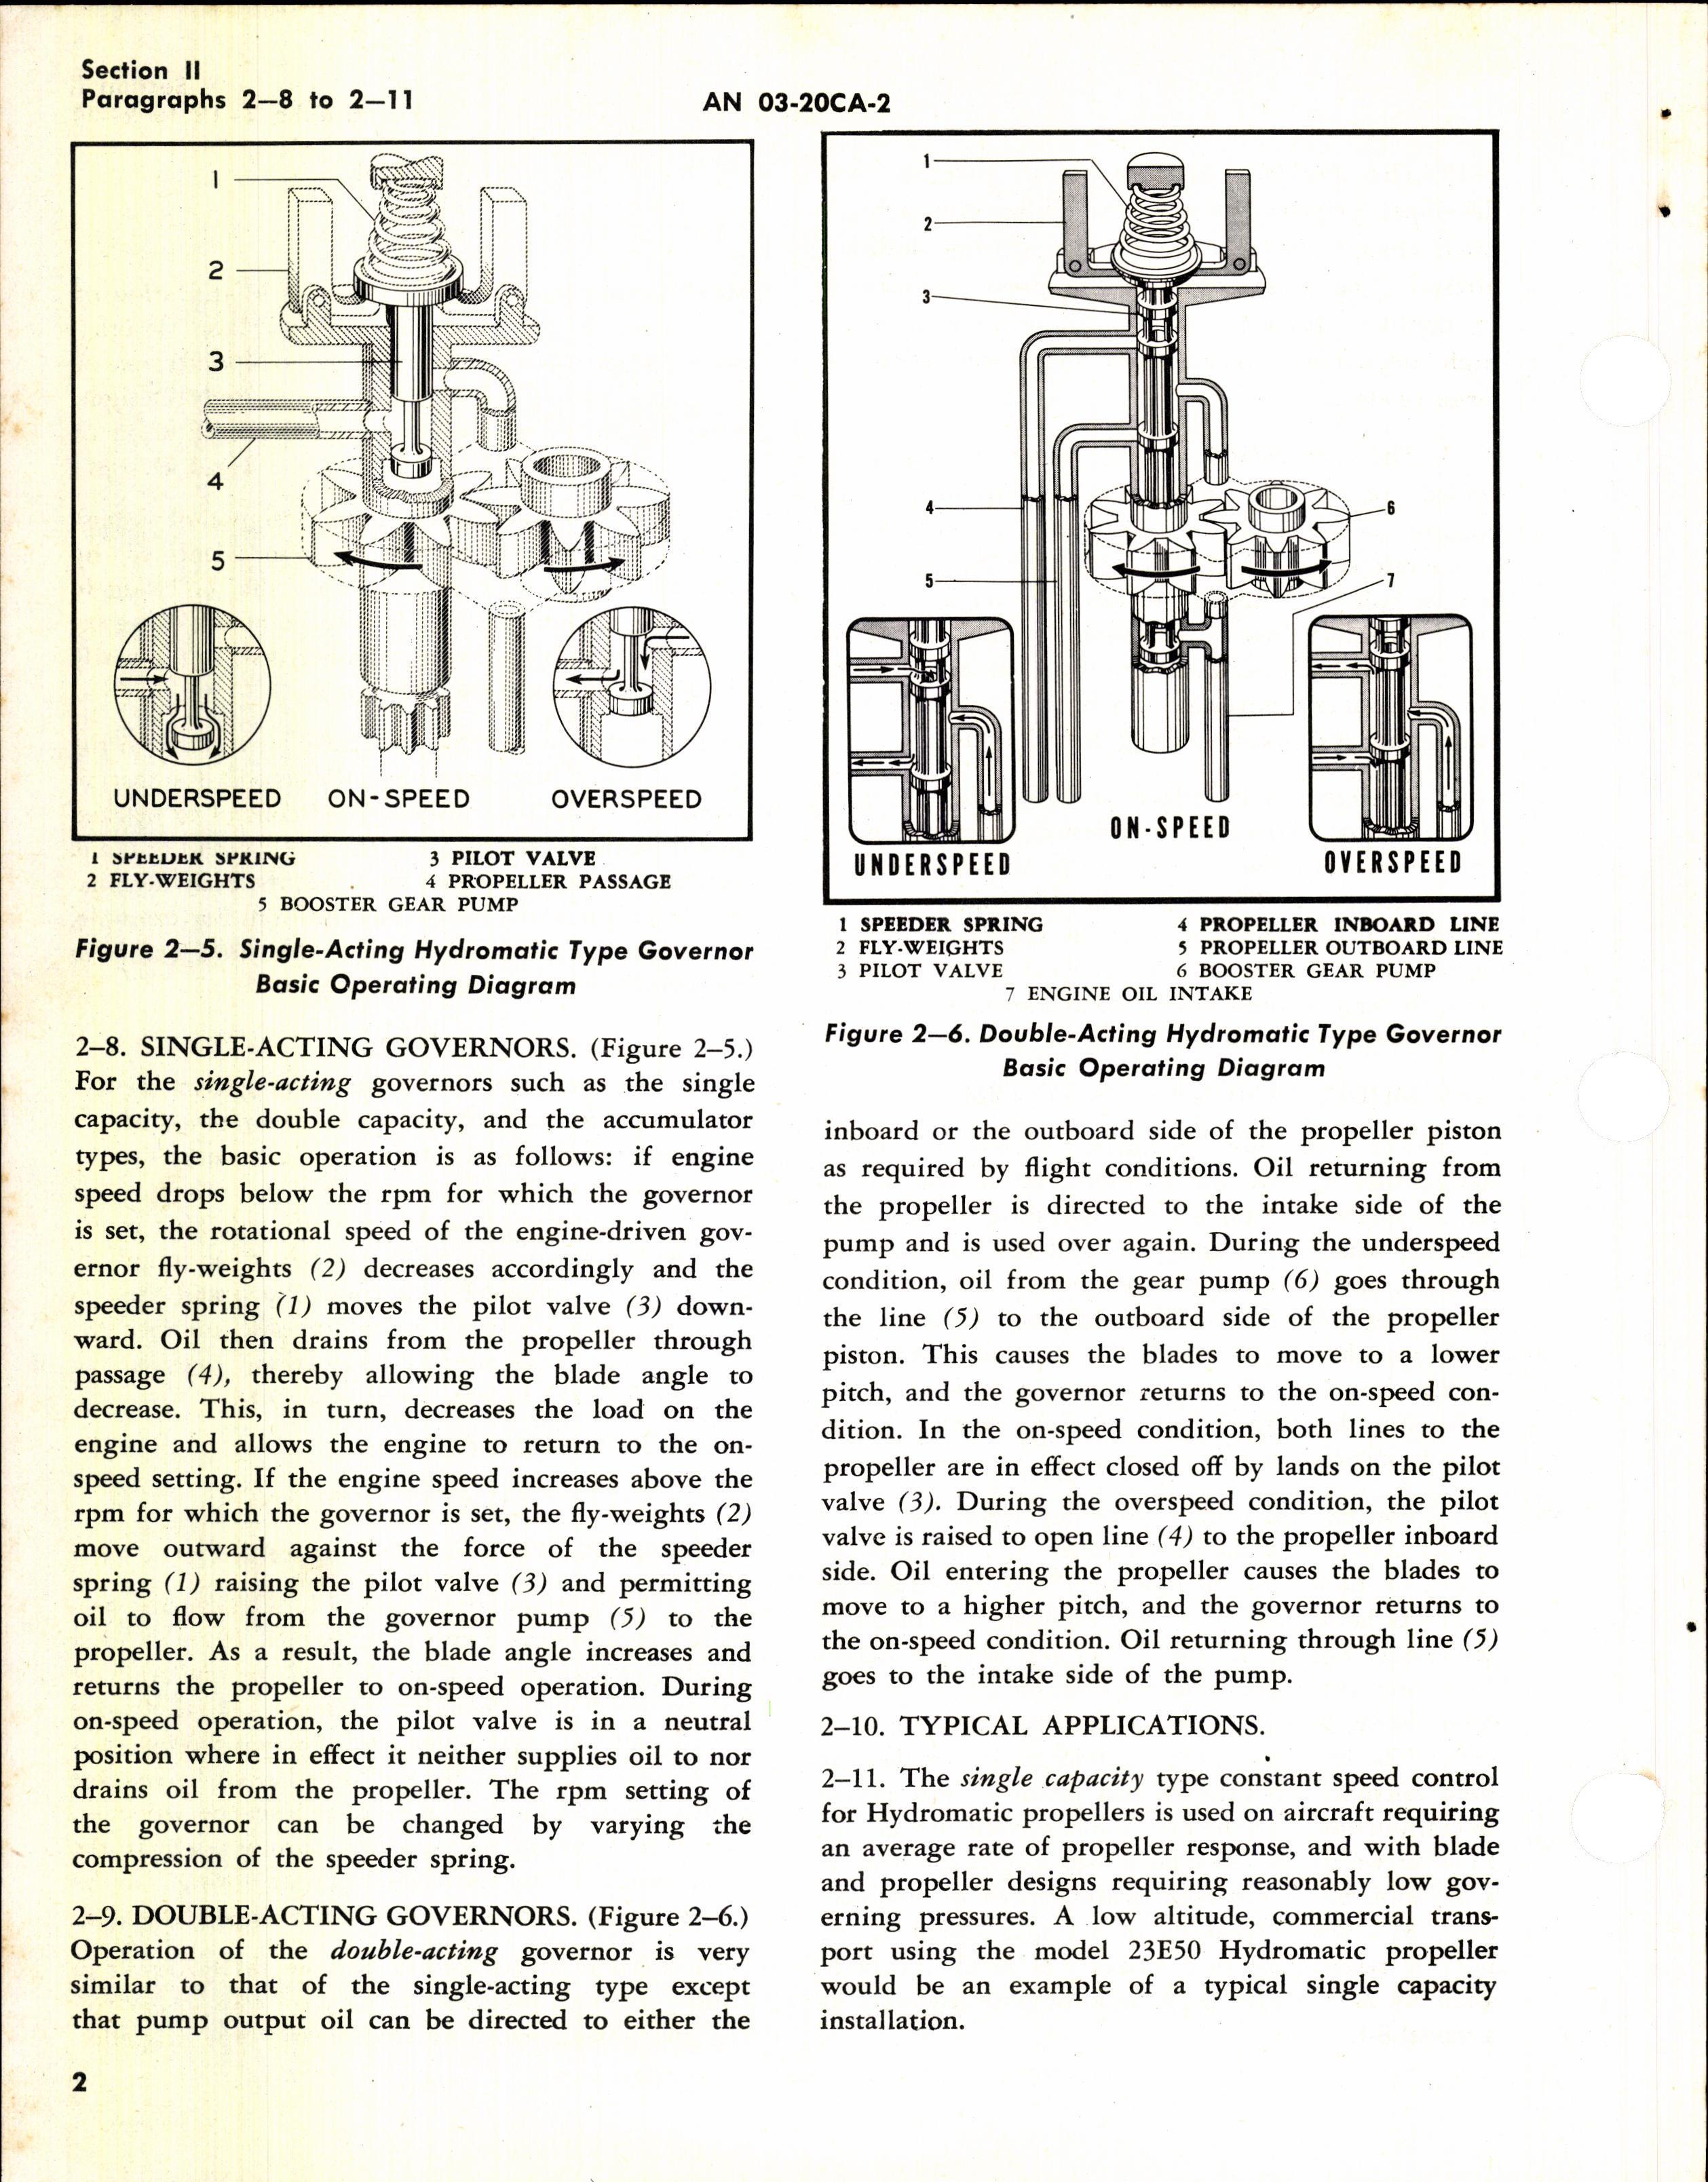 Sample page 6 from AirCorps Library document: Operation, Service, & Overhaul Instructions with Parts Catalog for Constant Speed and Hydromatic Propellers